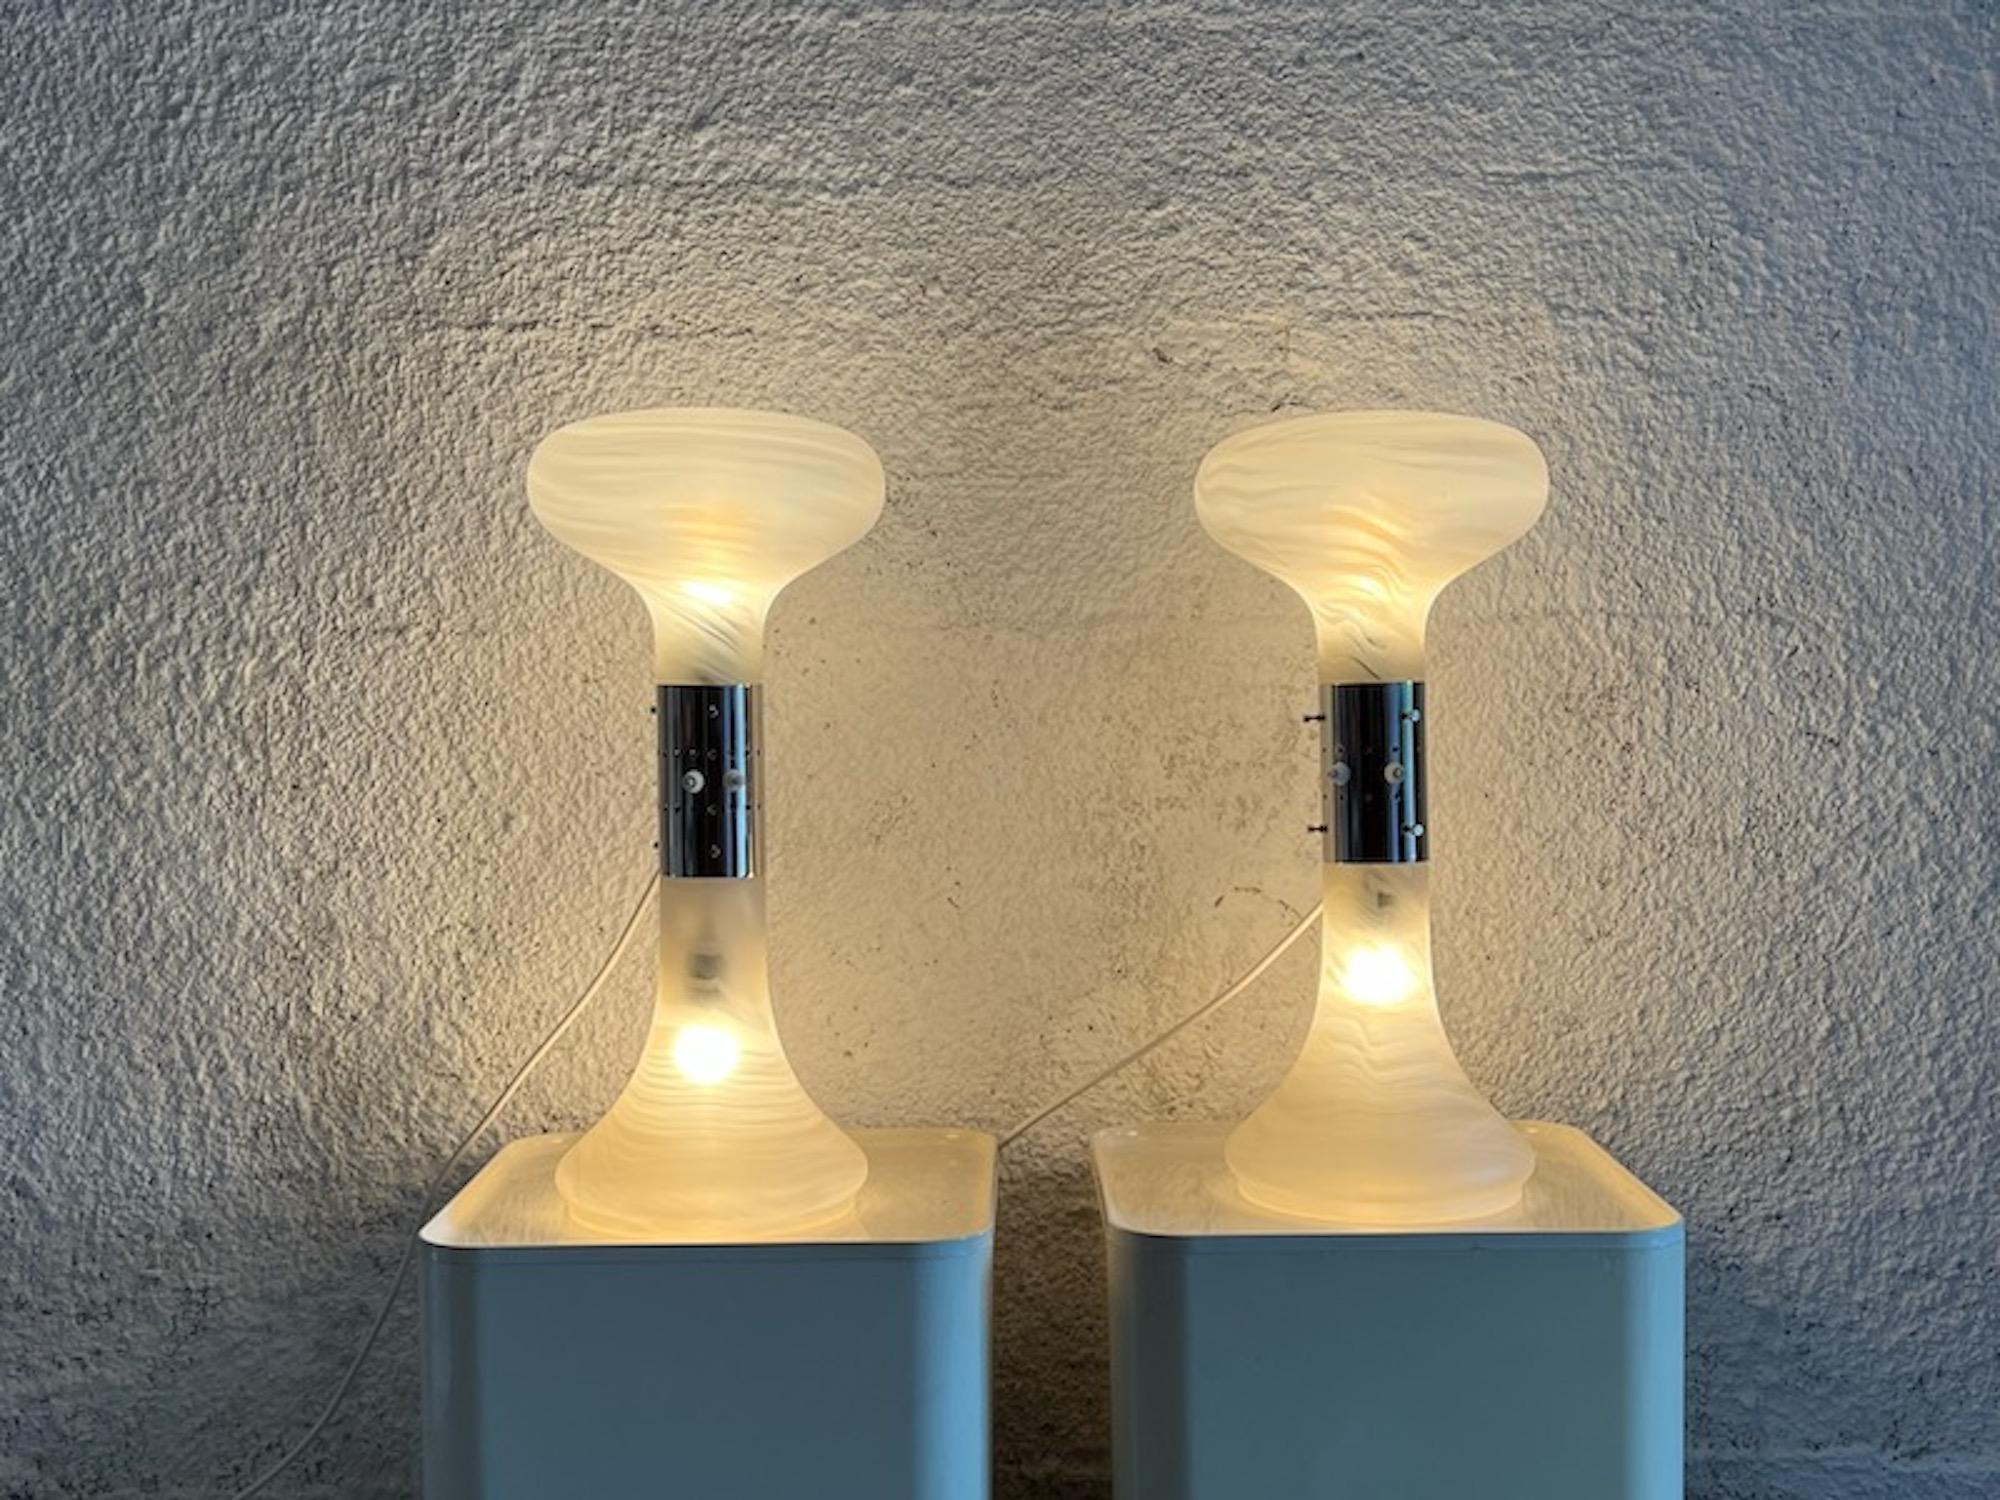 Amazing and rare 70s table lamps from the legendary series ‘Numerati’ by Carlo Nason for Mazzega, Italy.

This large lamps are made of the awesome mouth-blown translucent Murano glass. The white whirls add a touch of vintage sophistication.

In